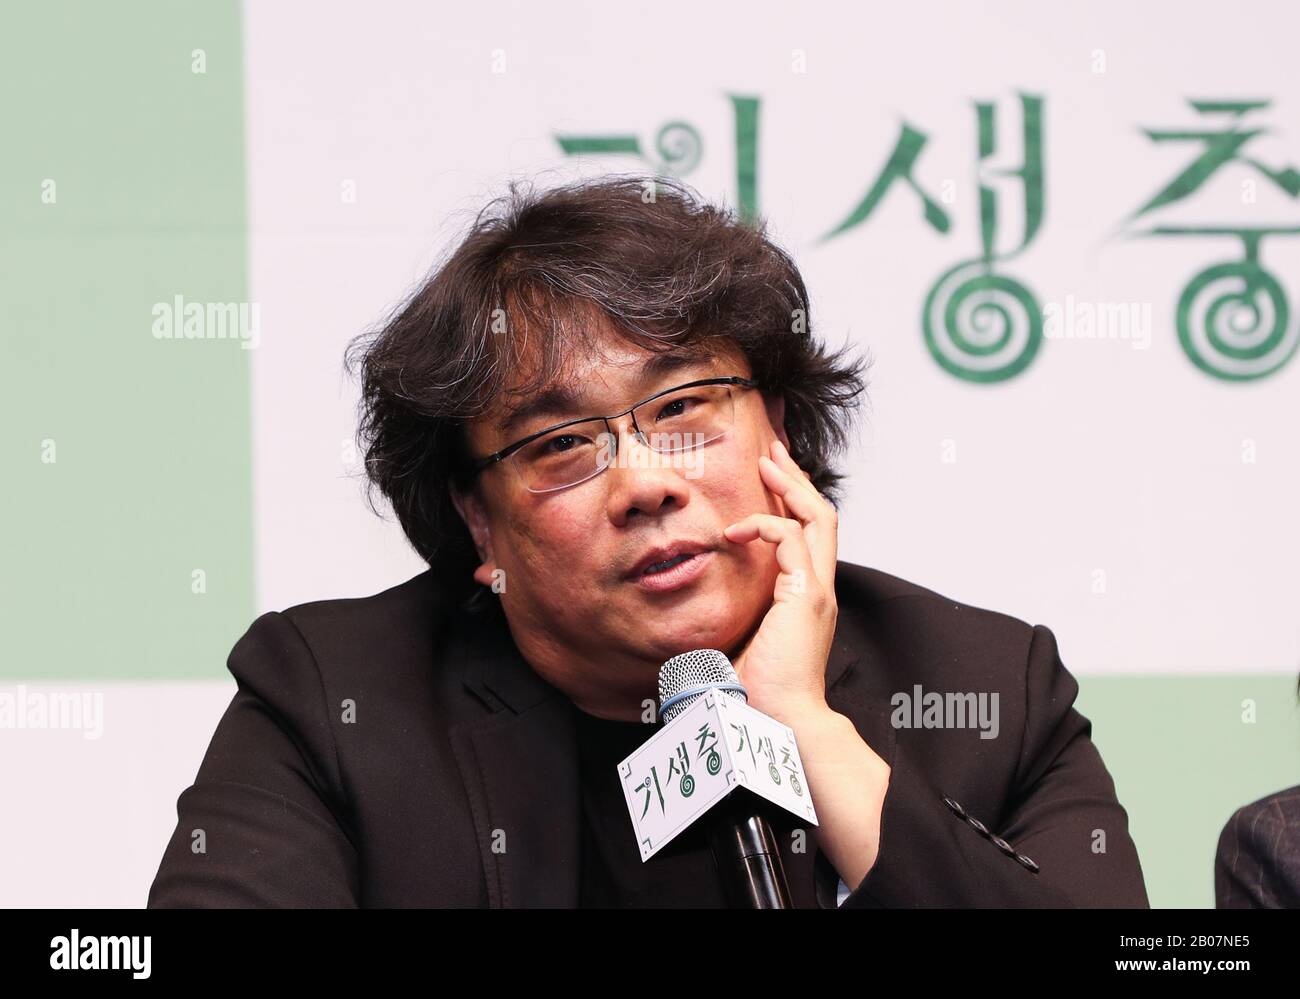 (200219) -- SEOUL, Feb. 19, 2020 (Xinhua) -- Bong Joon-ho, director of the South Korean film 'Parasite', answers questions at a press conference in Seoul, South Korea, Feb. 19, 2020. 'Parasite', a South Korean black comedy, became the first non-English language film to win the Oscar for best picture, and also nabbed awards for best original screenplay, best international feature film and best director for Bong Joon-ho at the 92nd Academy Awards on Feb. 9, 2020. (Xinhua/Wang Jingqiang) Stock Photo